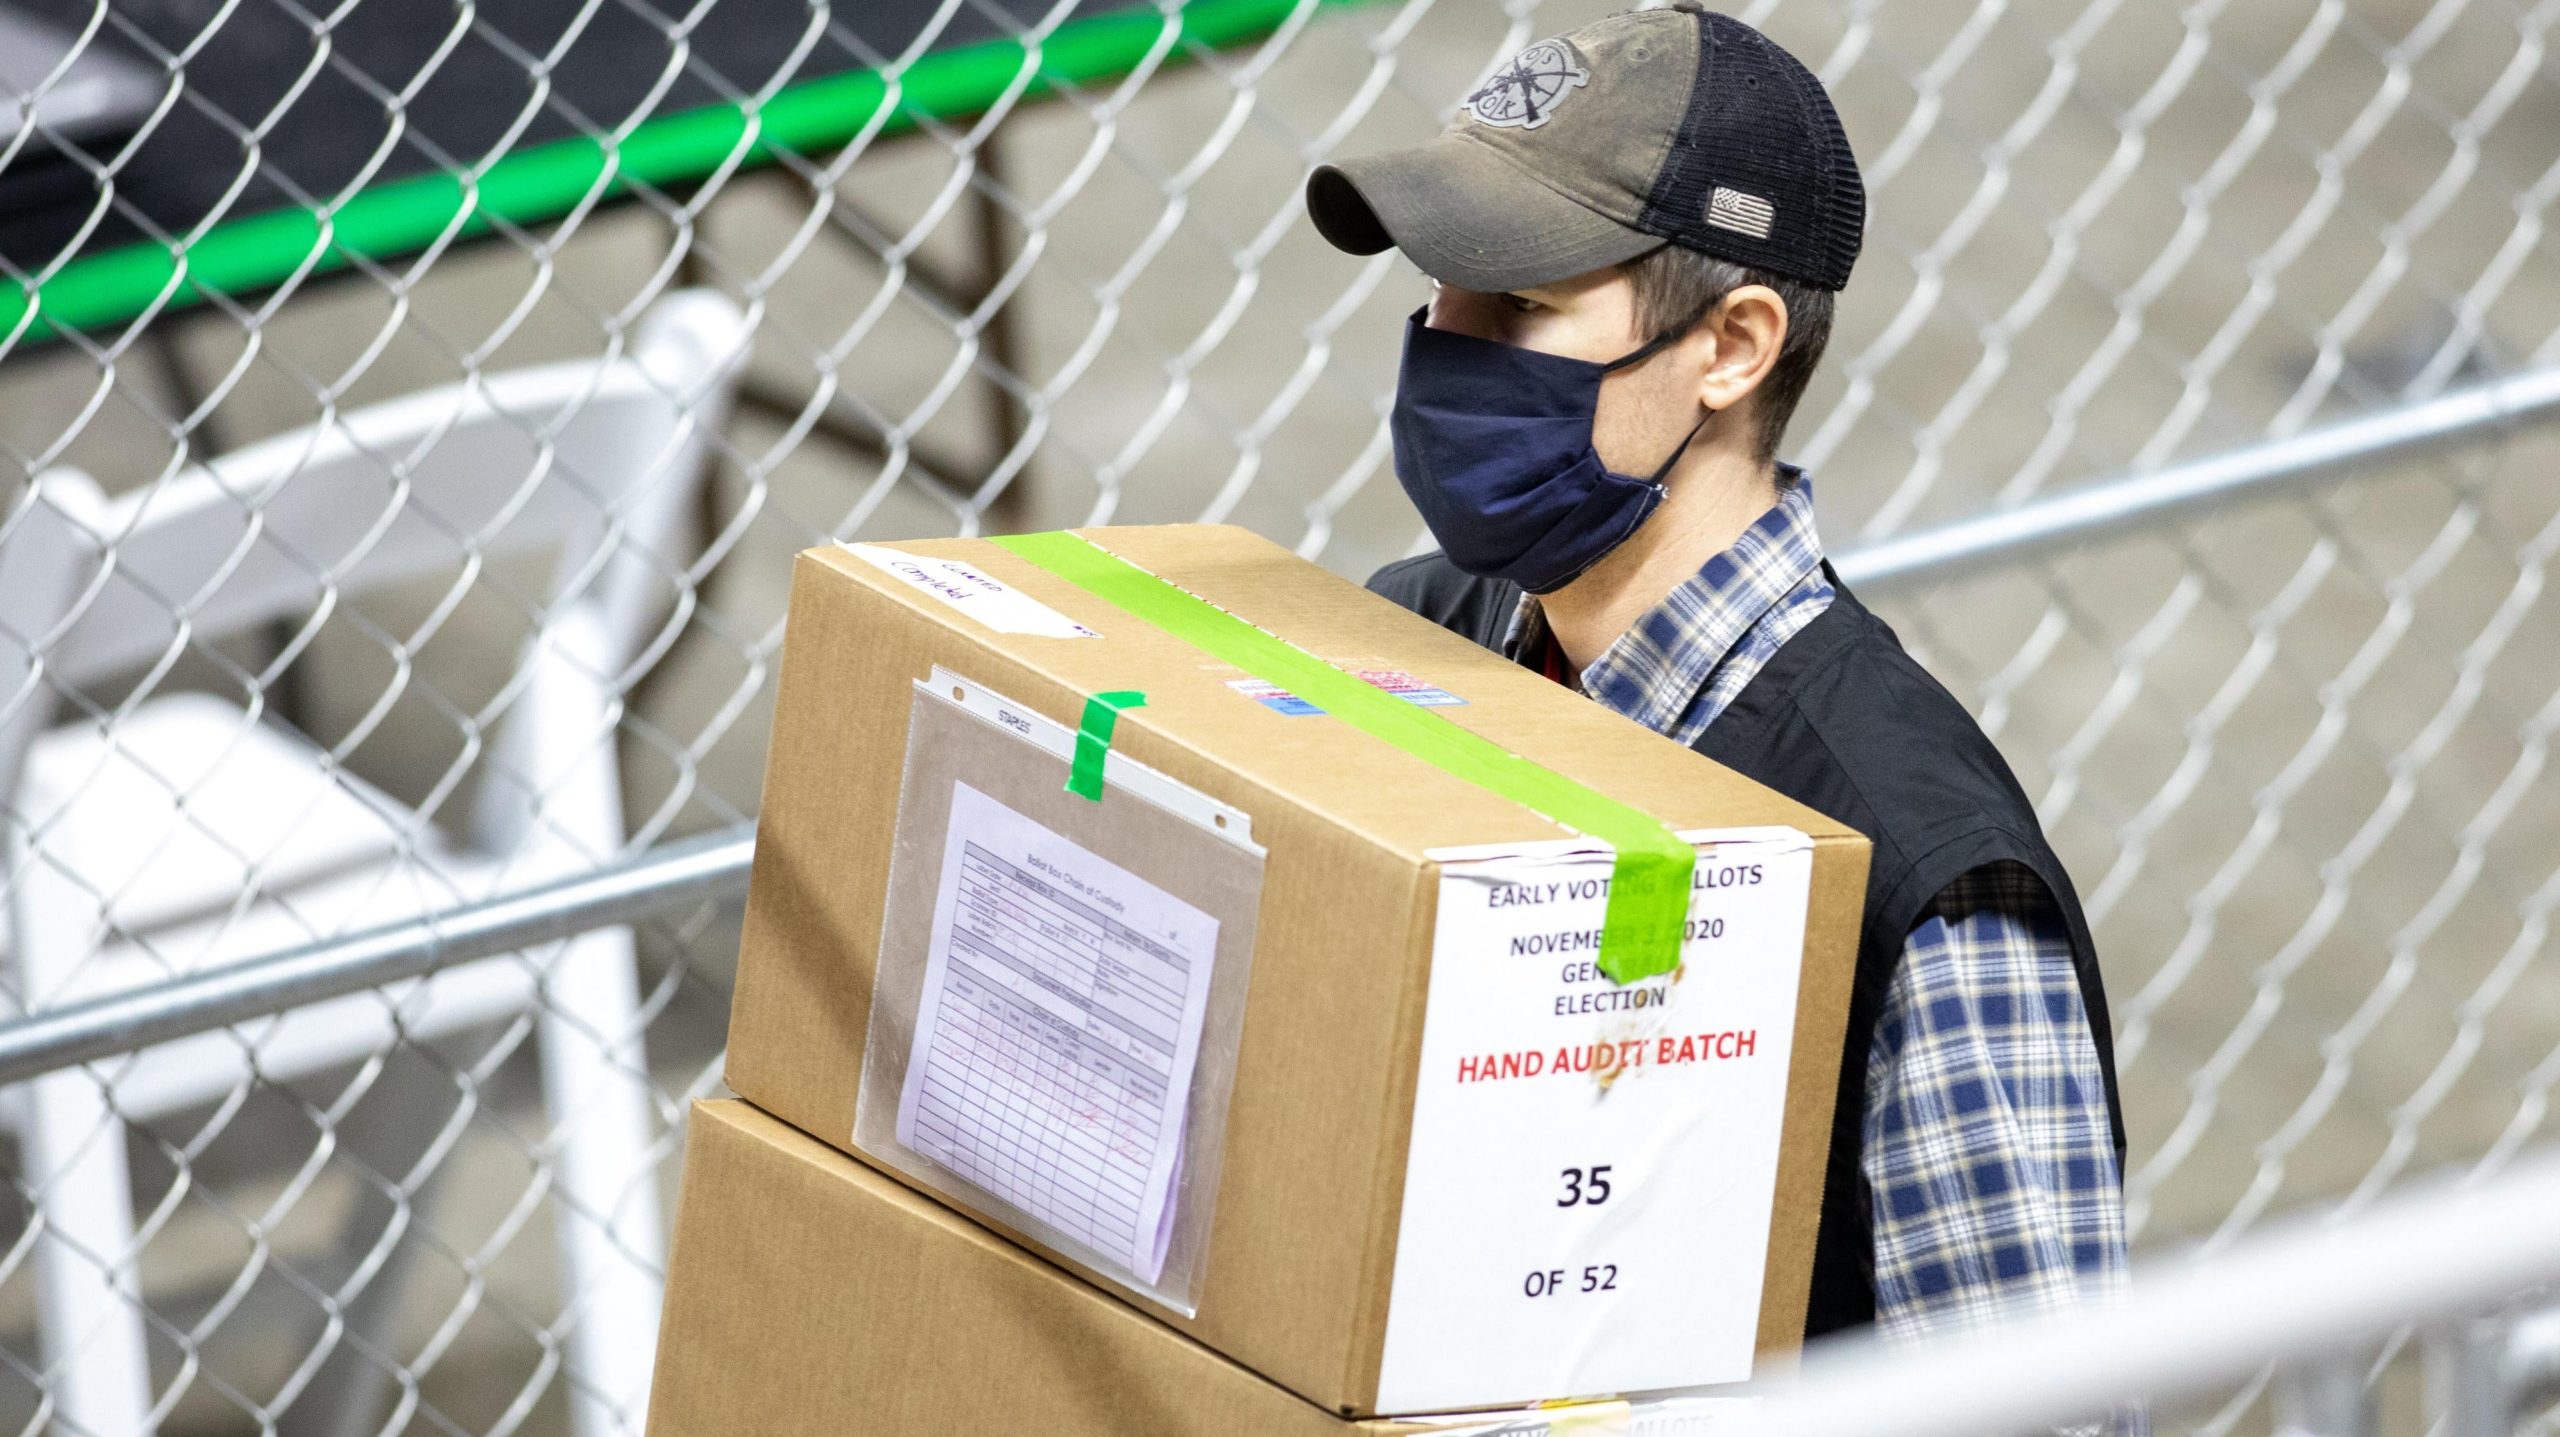 A contractor for Cyber Ninjas transporting ballots from Maricopa County's 2020 general election at Veterans Memorial Coliseum in Phoenix, Arizona, in May 2021. (Photo: Courtney Pedroza, Getty Images)